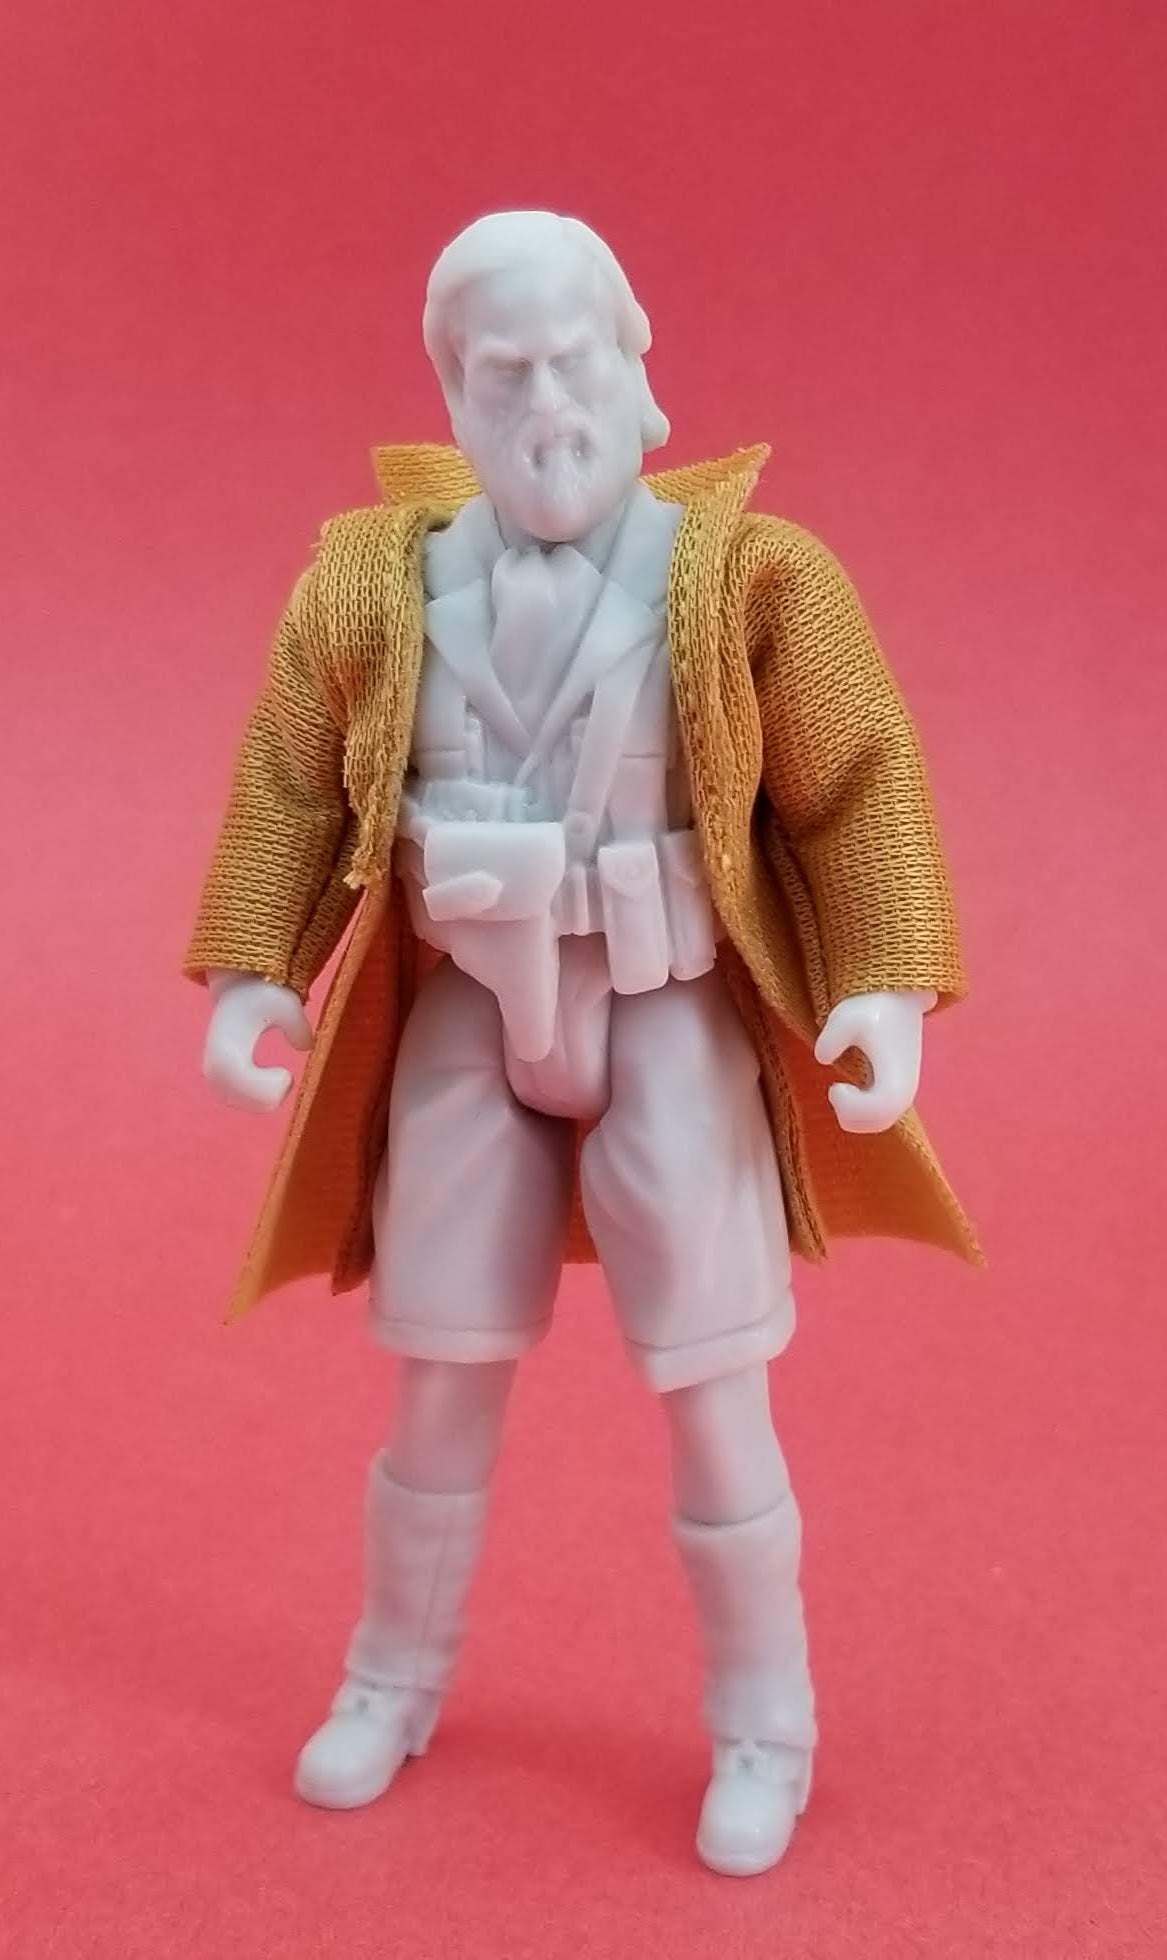 Duster Jacket Small Size (figure not included)